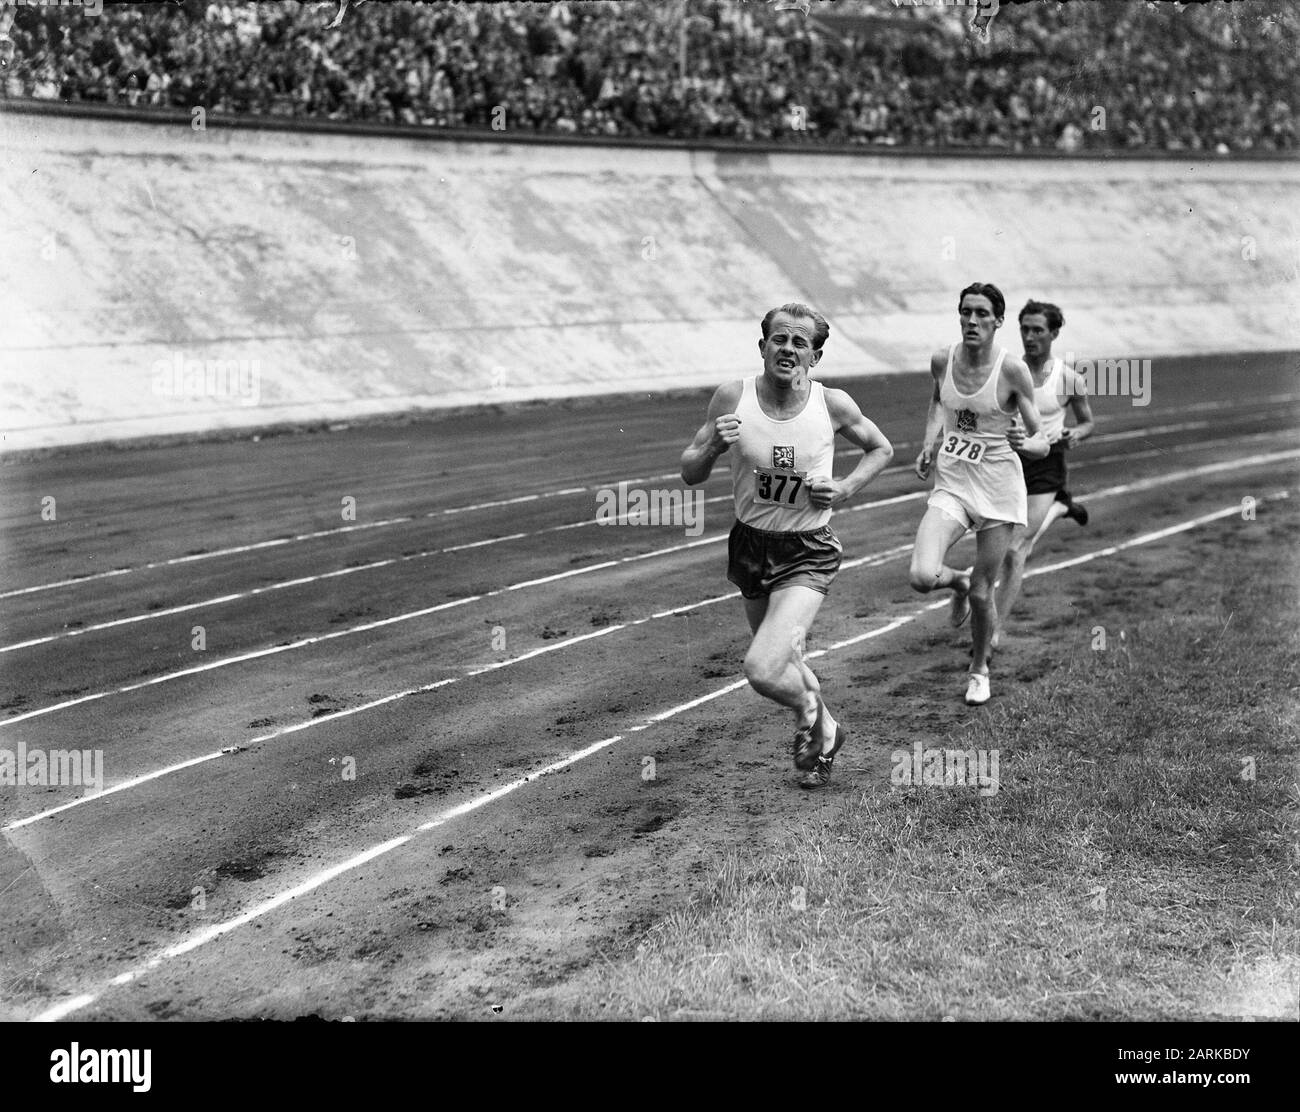 International Athletics Competition at the Olympic Stadium. Emil Zatopek Annotation: With behind him Erik Ahlden and Willem Slijkhuis (dark pants) Date: 13 August 1948 Keywords: athletics, sports Person name: Zatopek, Emil Stock Photo